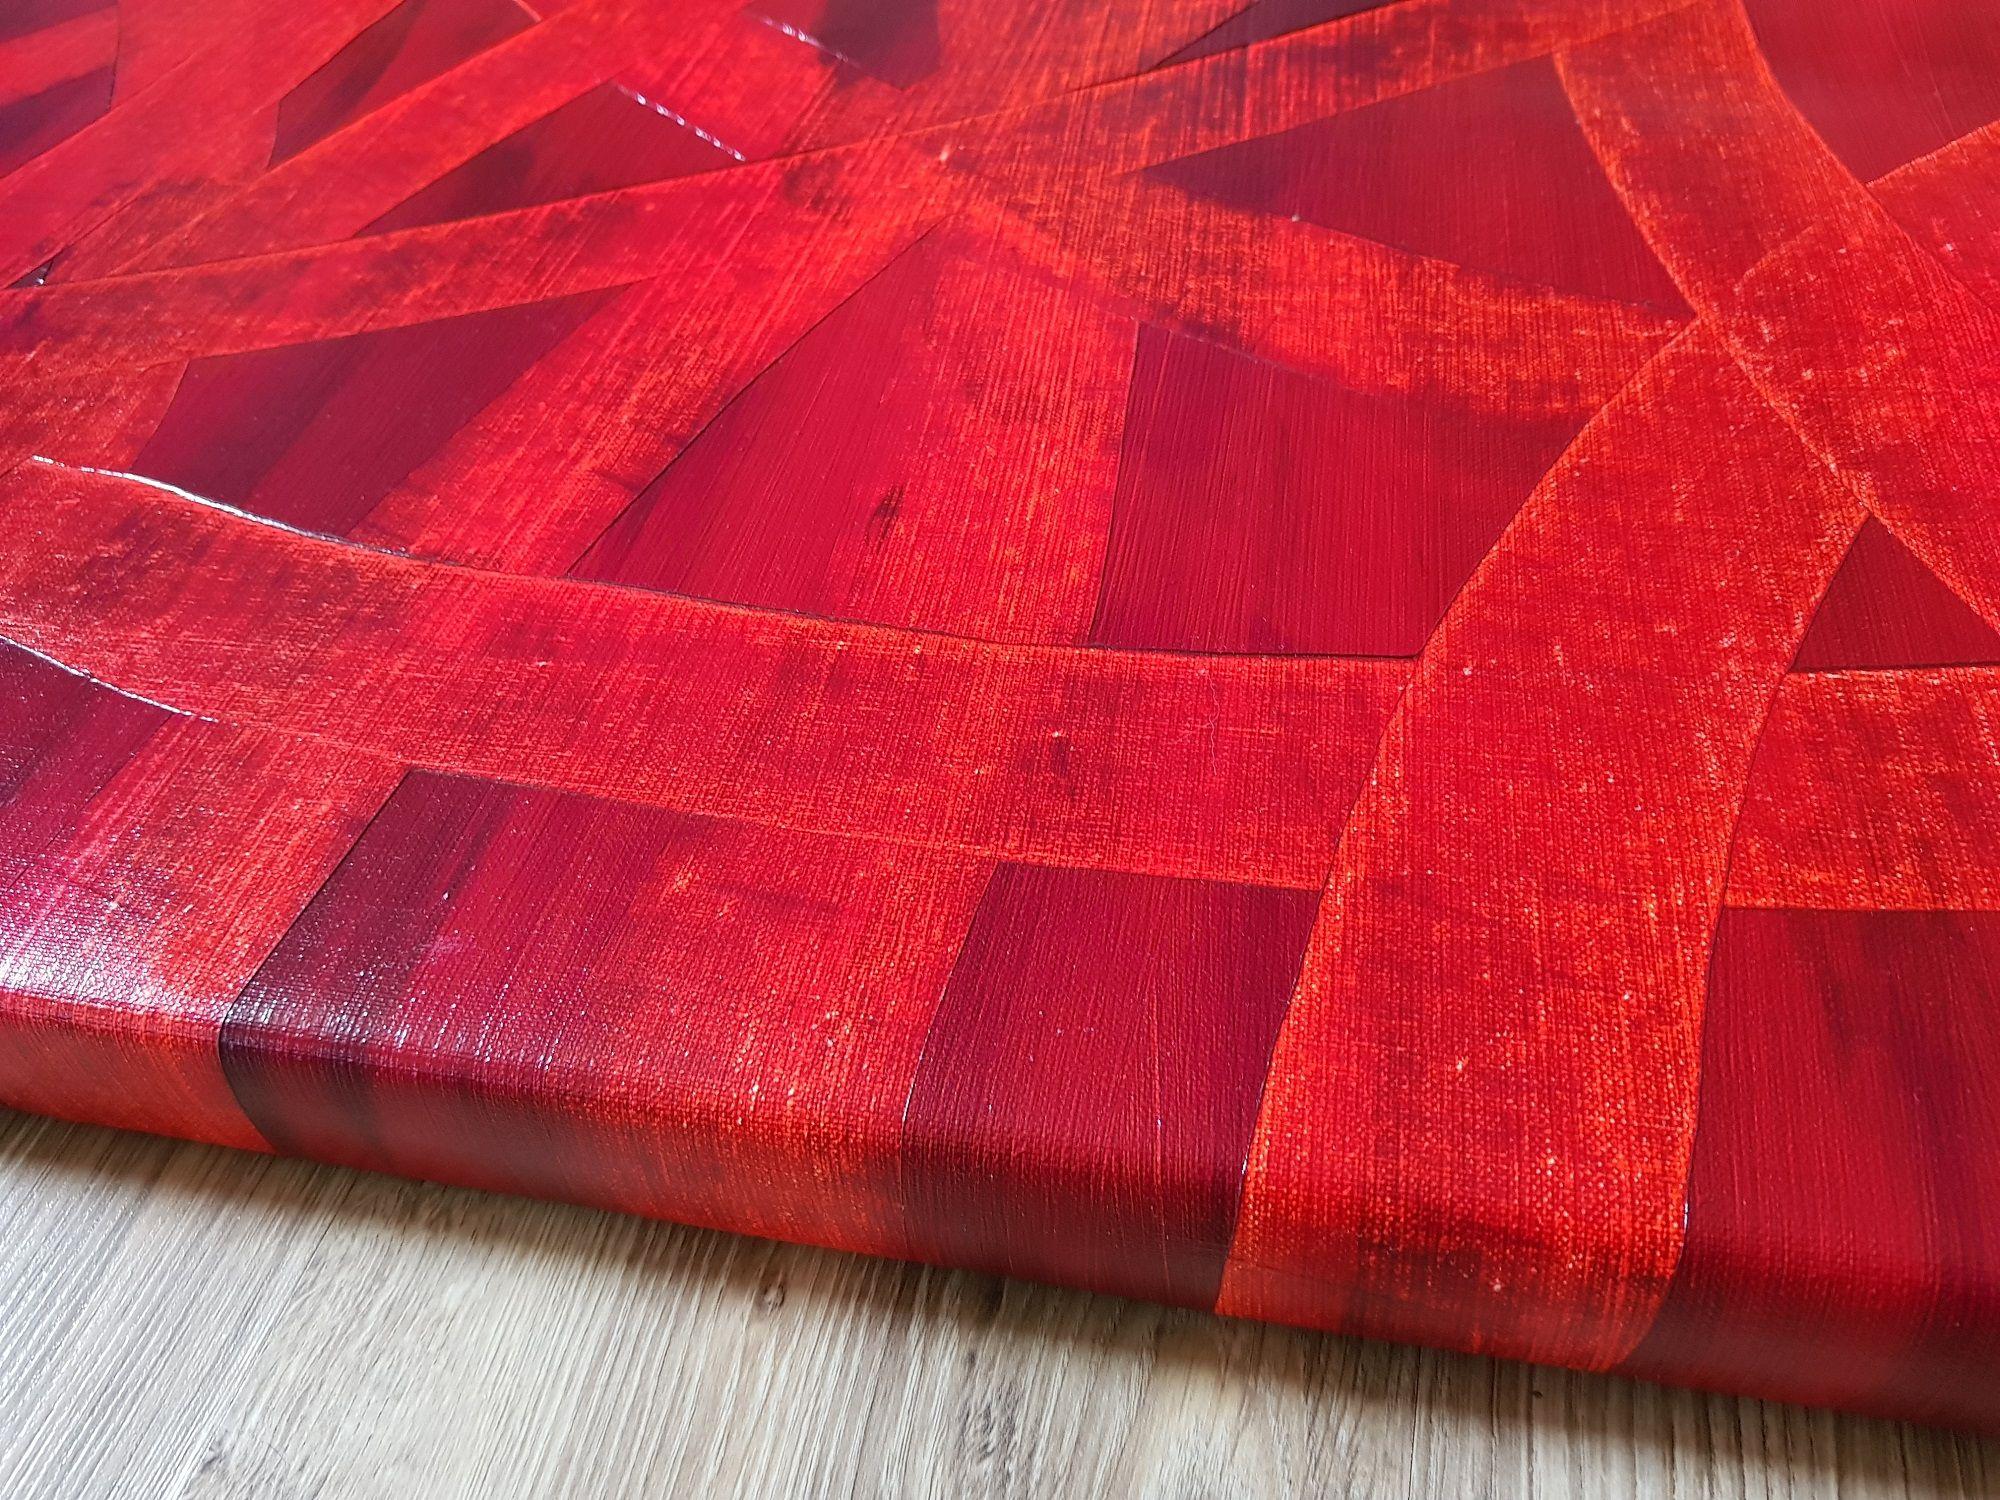   An original one-of-a-kind palette knife abstract painting with a gentle texture from a collection Passion.    Minimalistic abstract with pulsing energy created with shades of red.    Professional acrylics on a high-quality 400 g/mÂ² linen